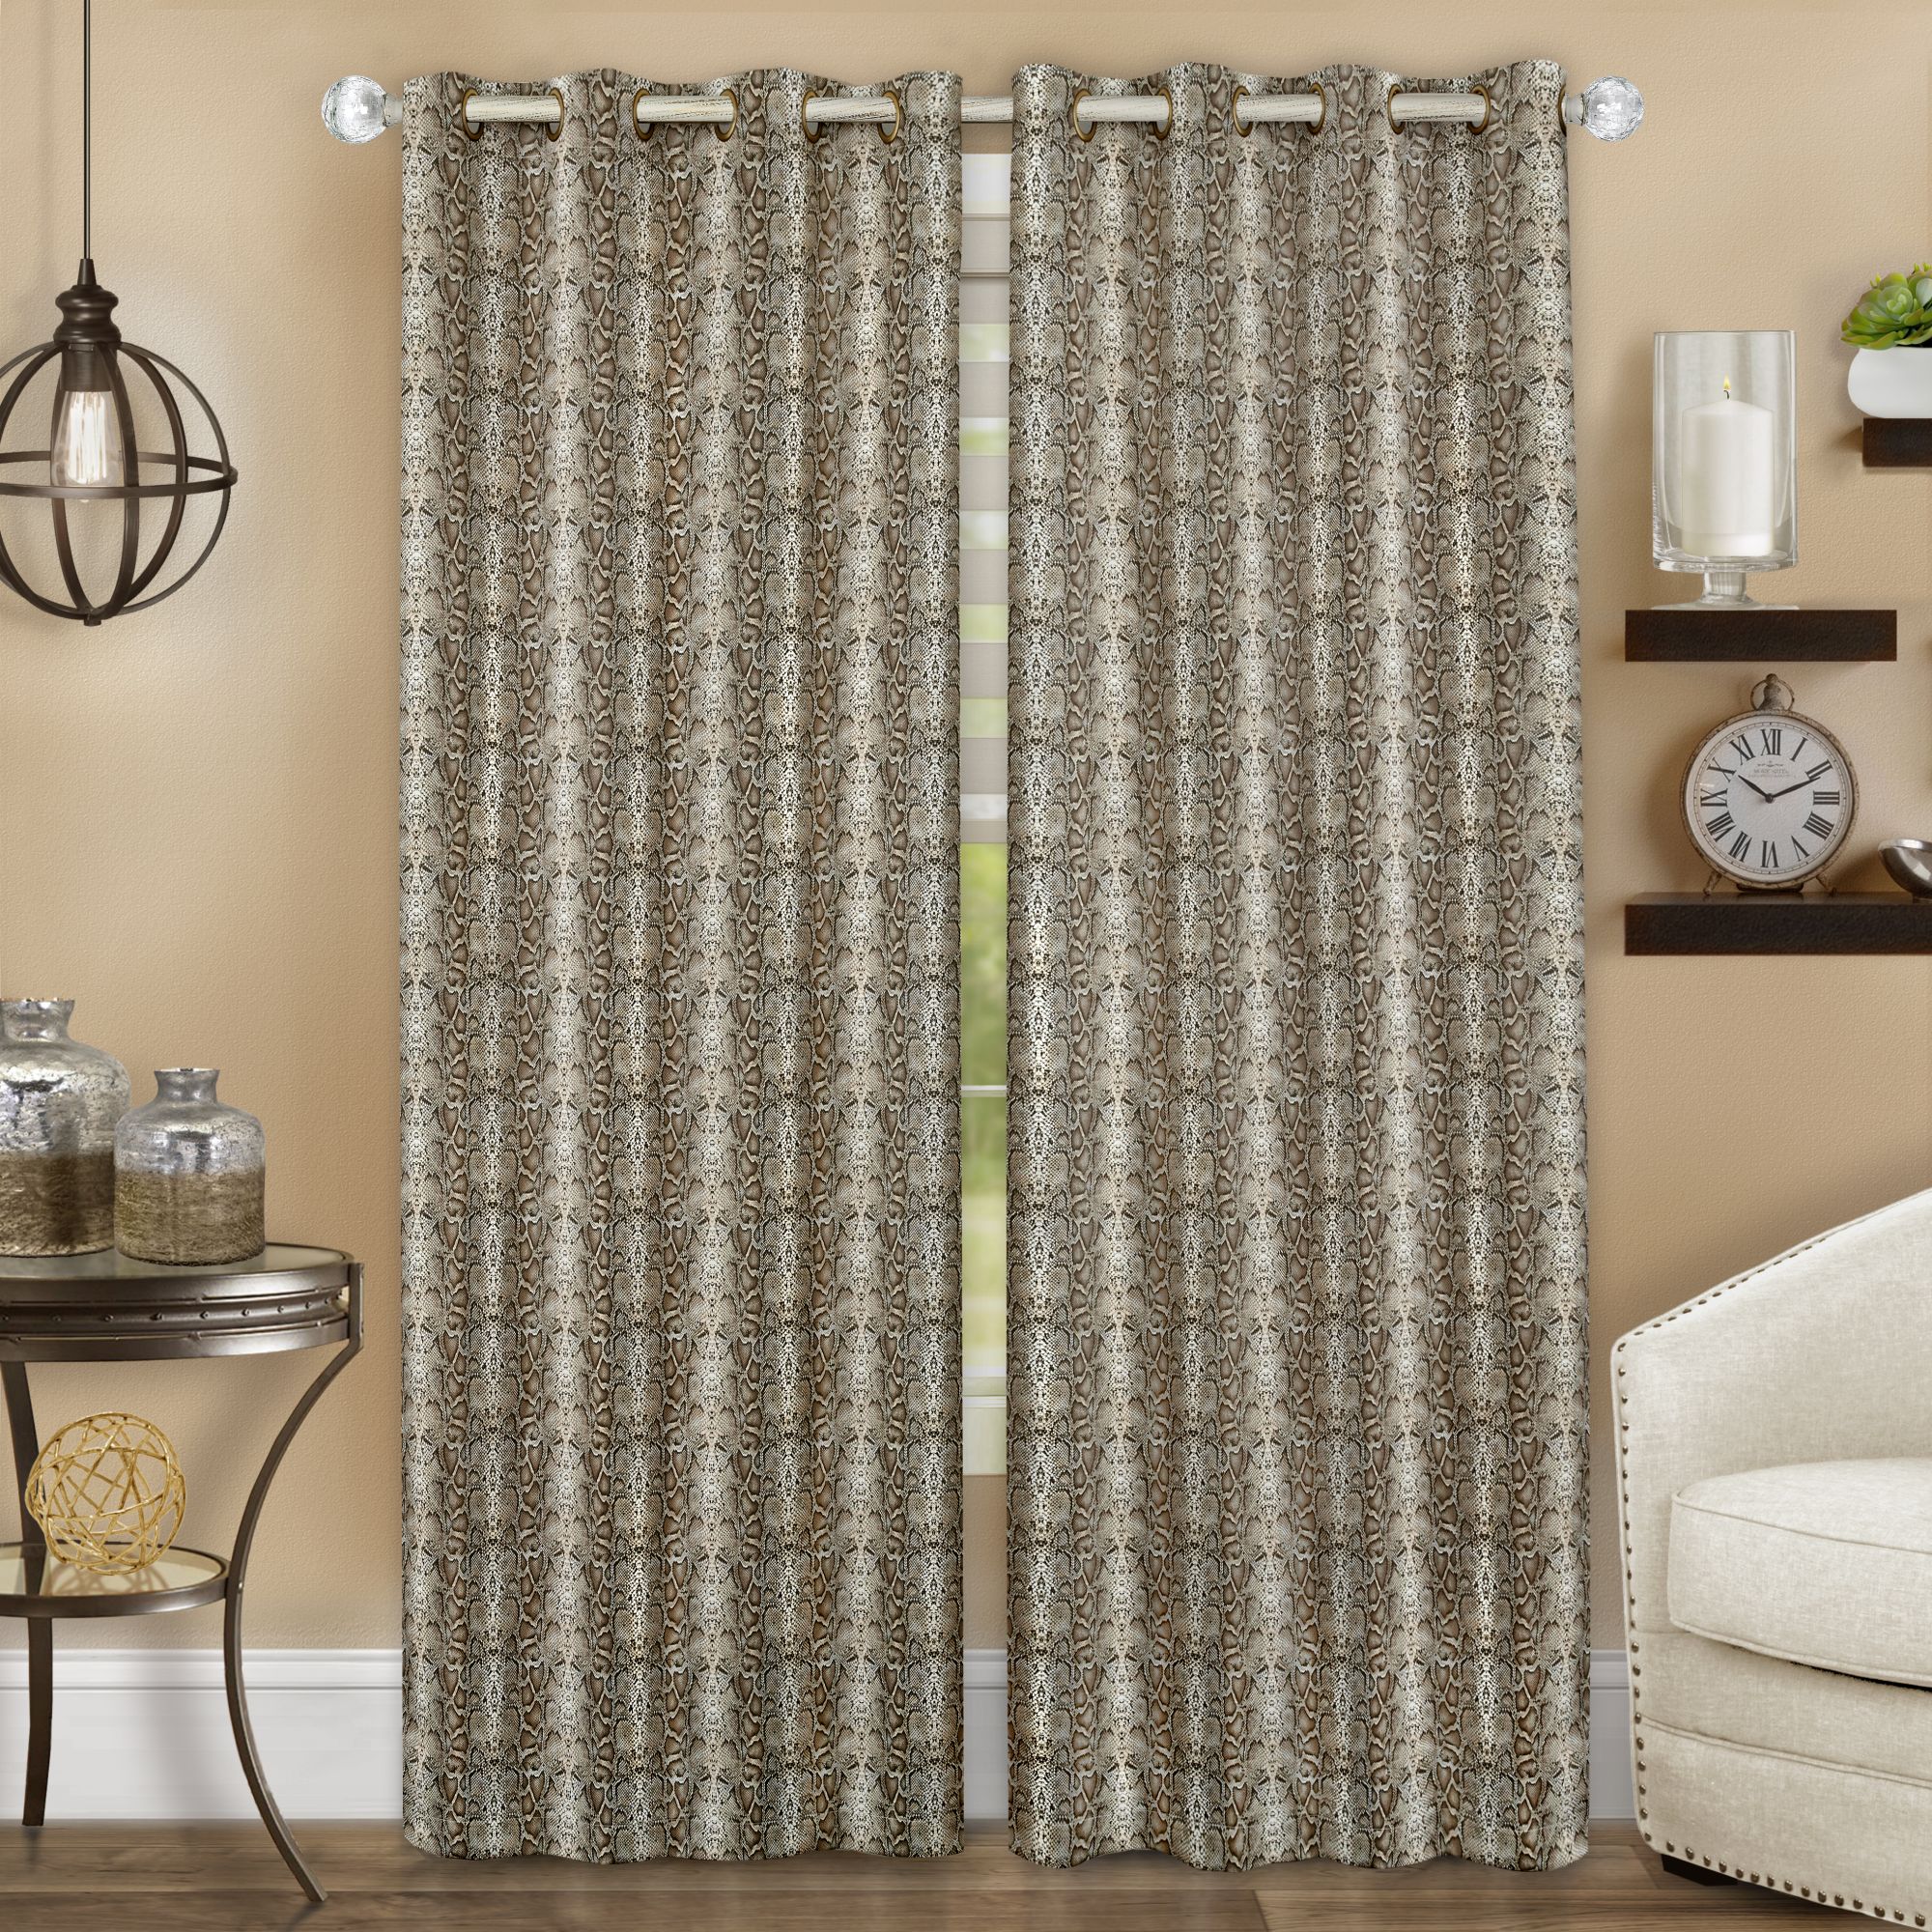 Achim Python Polyester Blackout Window Curtain Panel, Brown/Gold, 52" x 84" - image 1 of 5